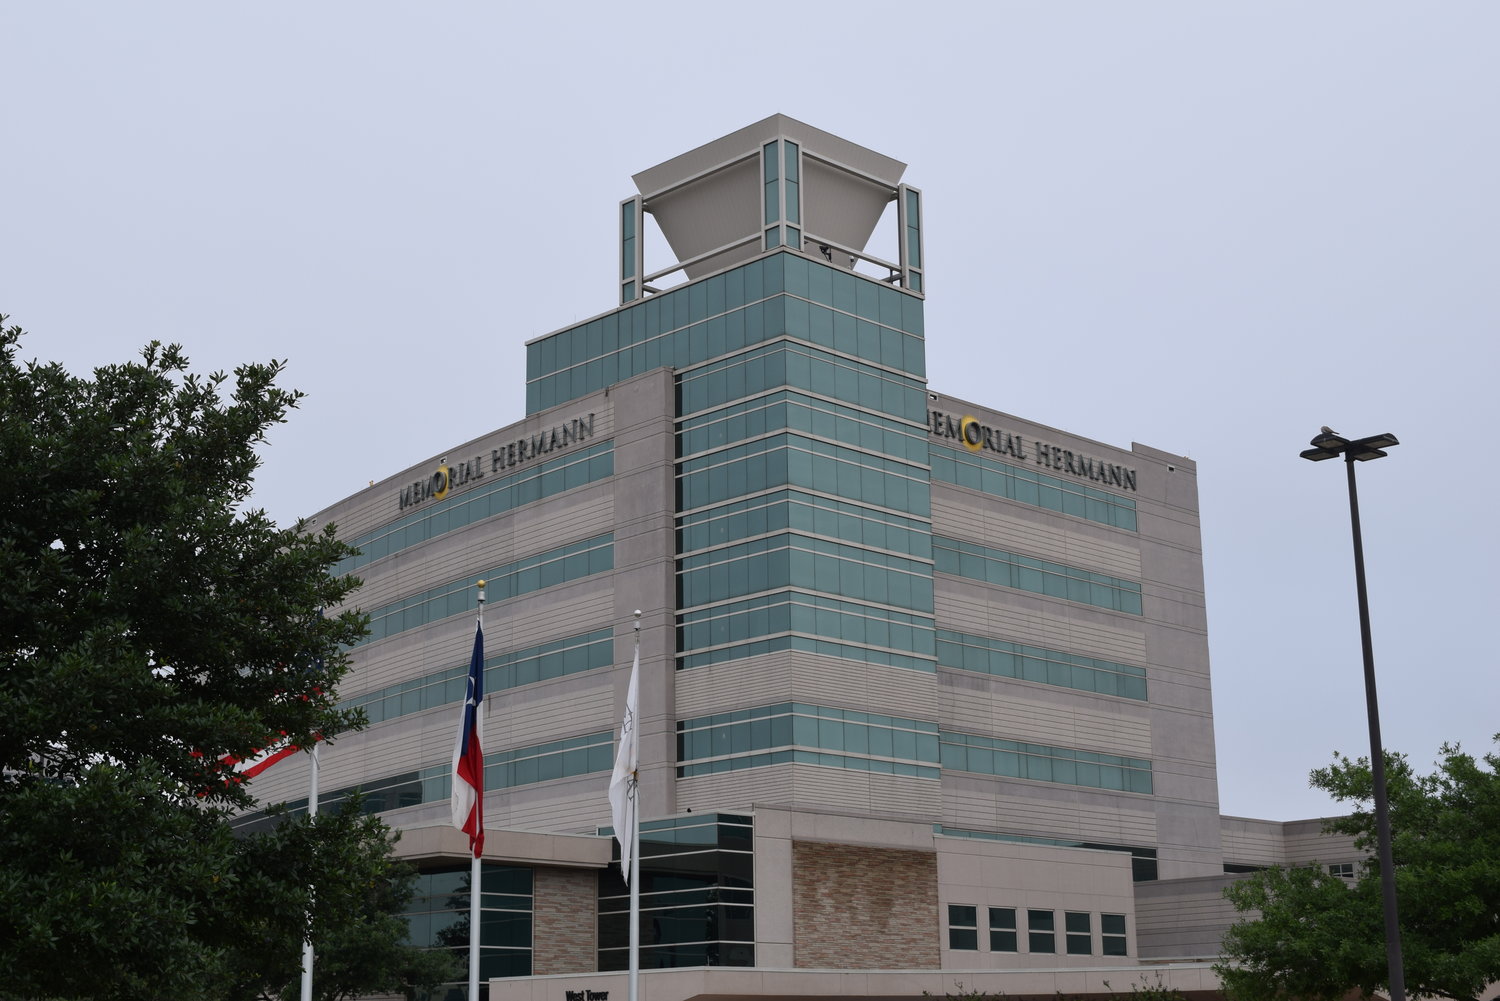 Memorial Hermann Katy opened in 1981 on Pin Oak Road with 100 beds. It has grown over the years to a 208-bed facility with programs for sports medicine, pediatric emergencies and training.